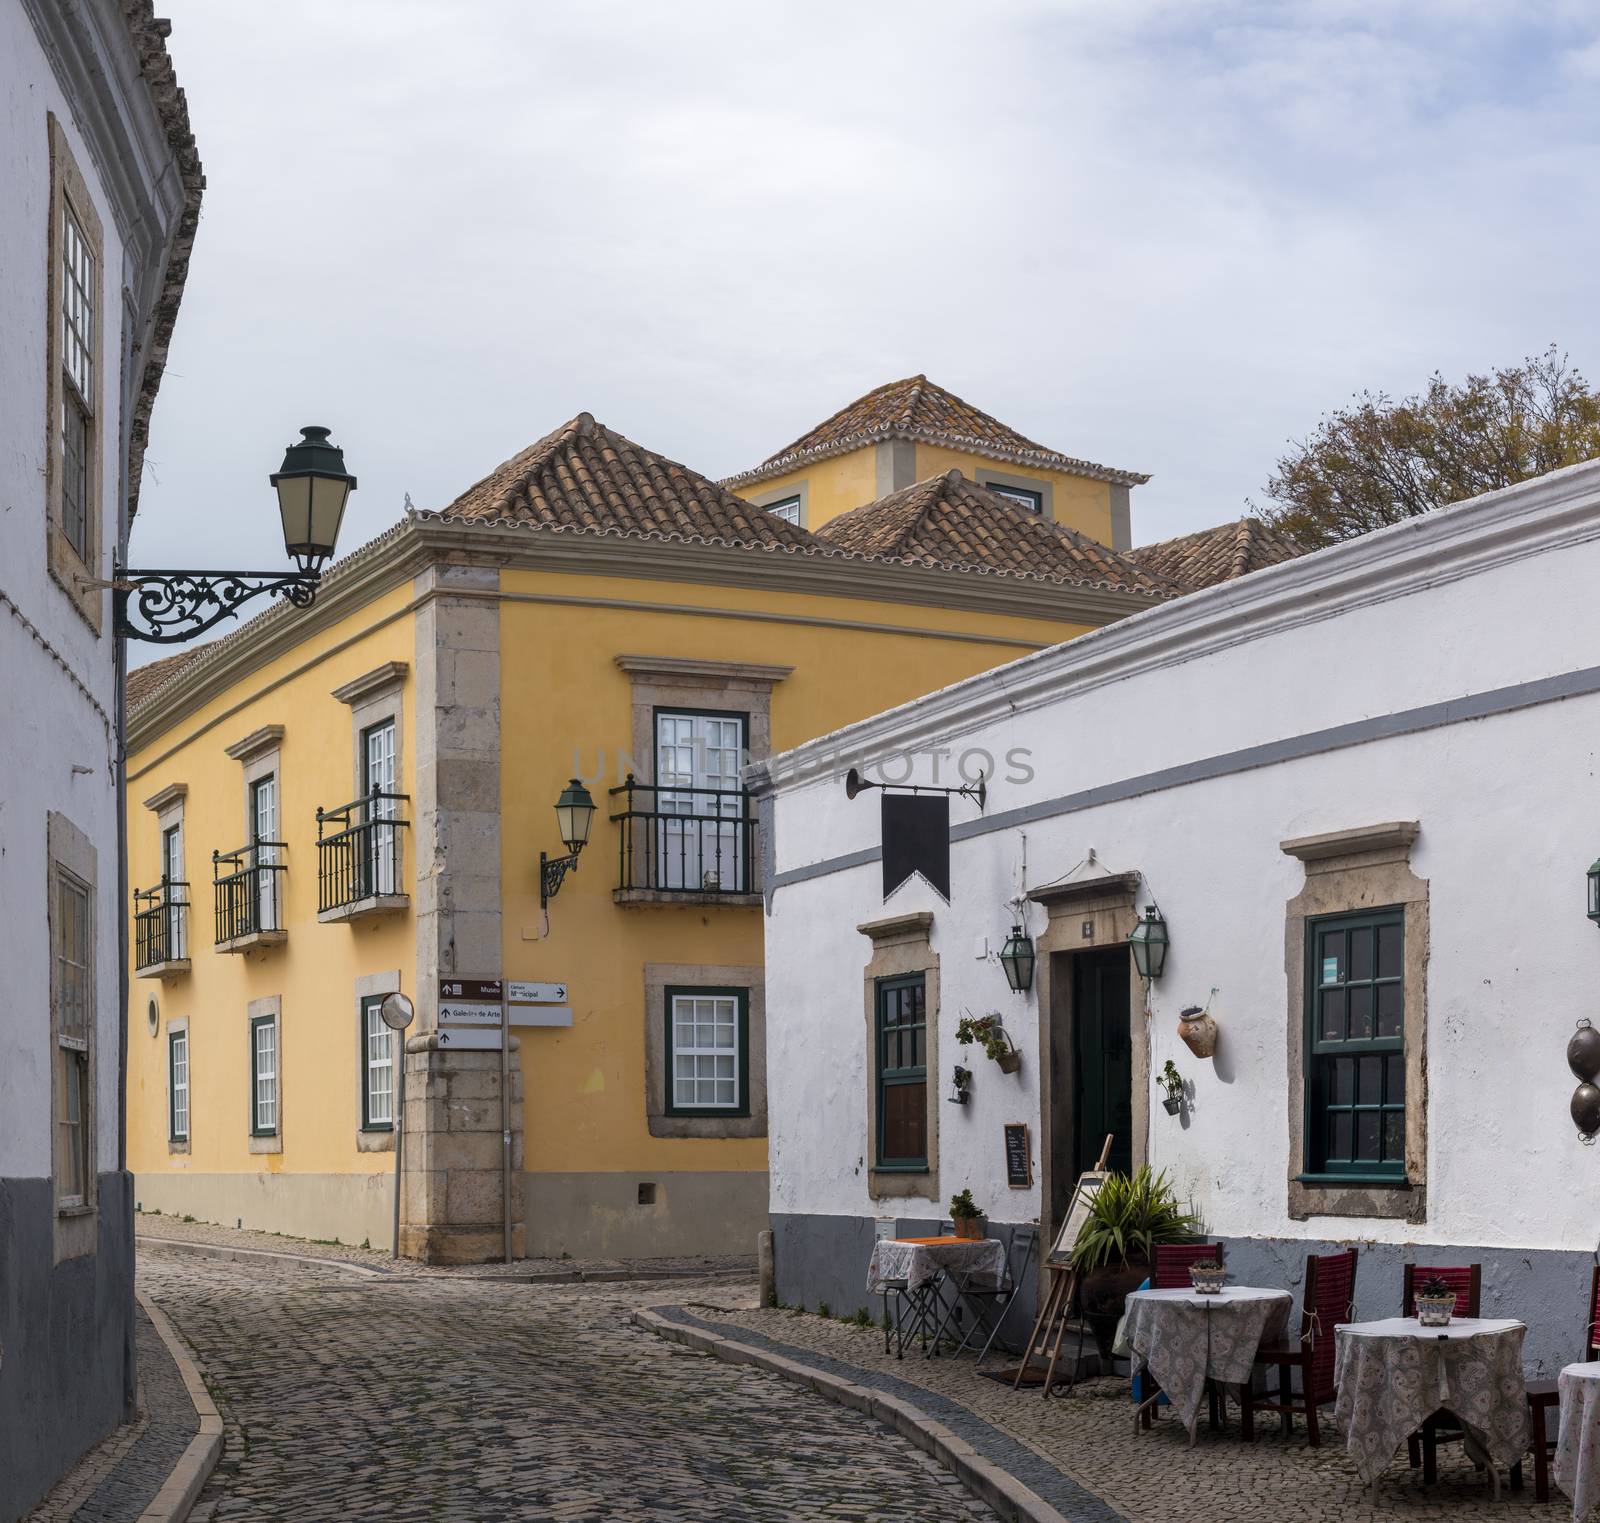 View of the typical streets in Faro city, located in Portugal.